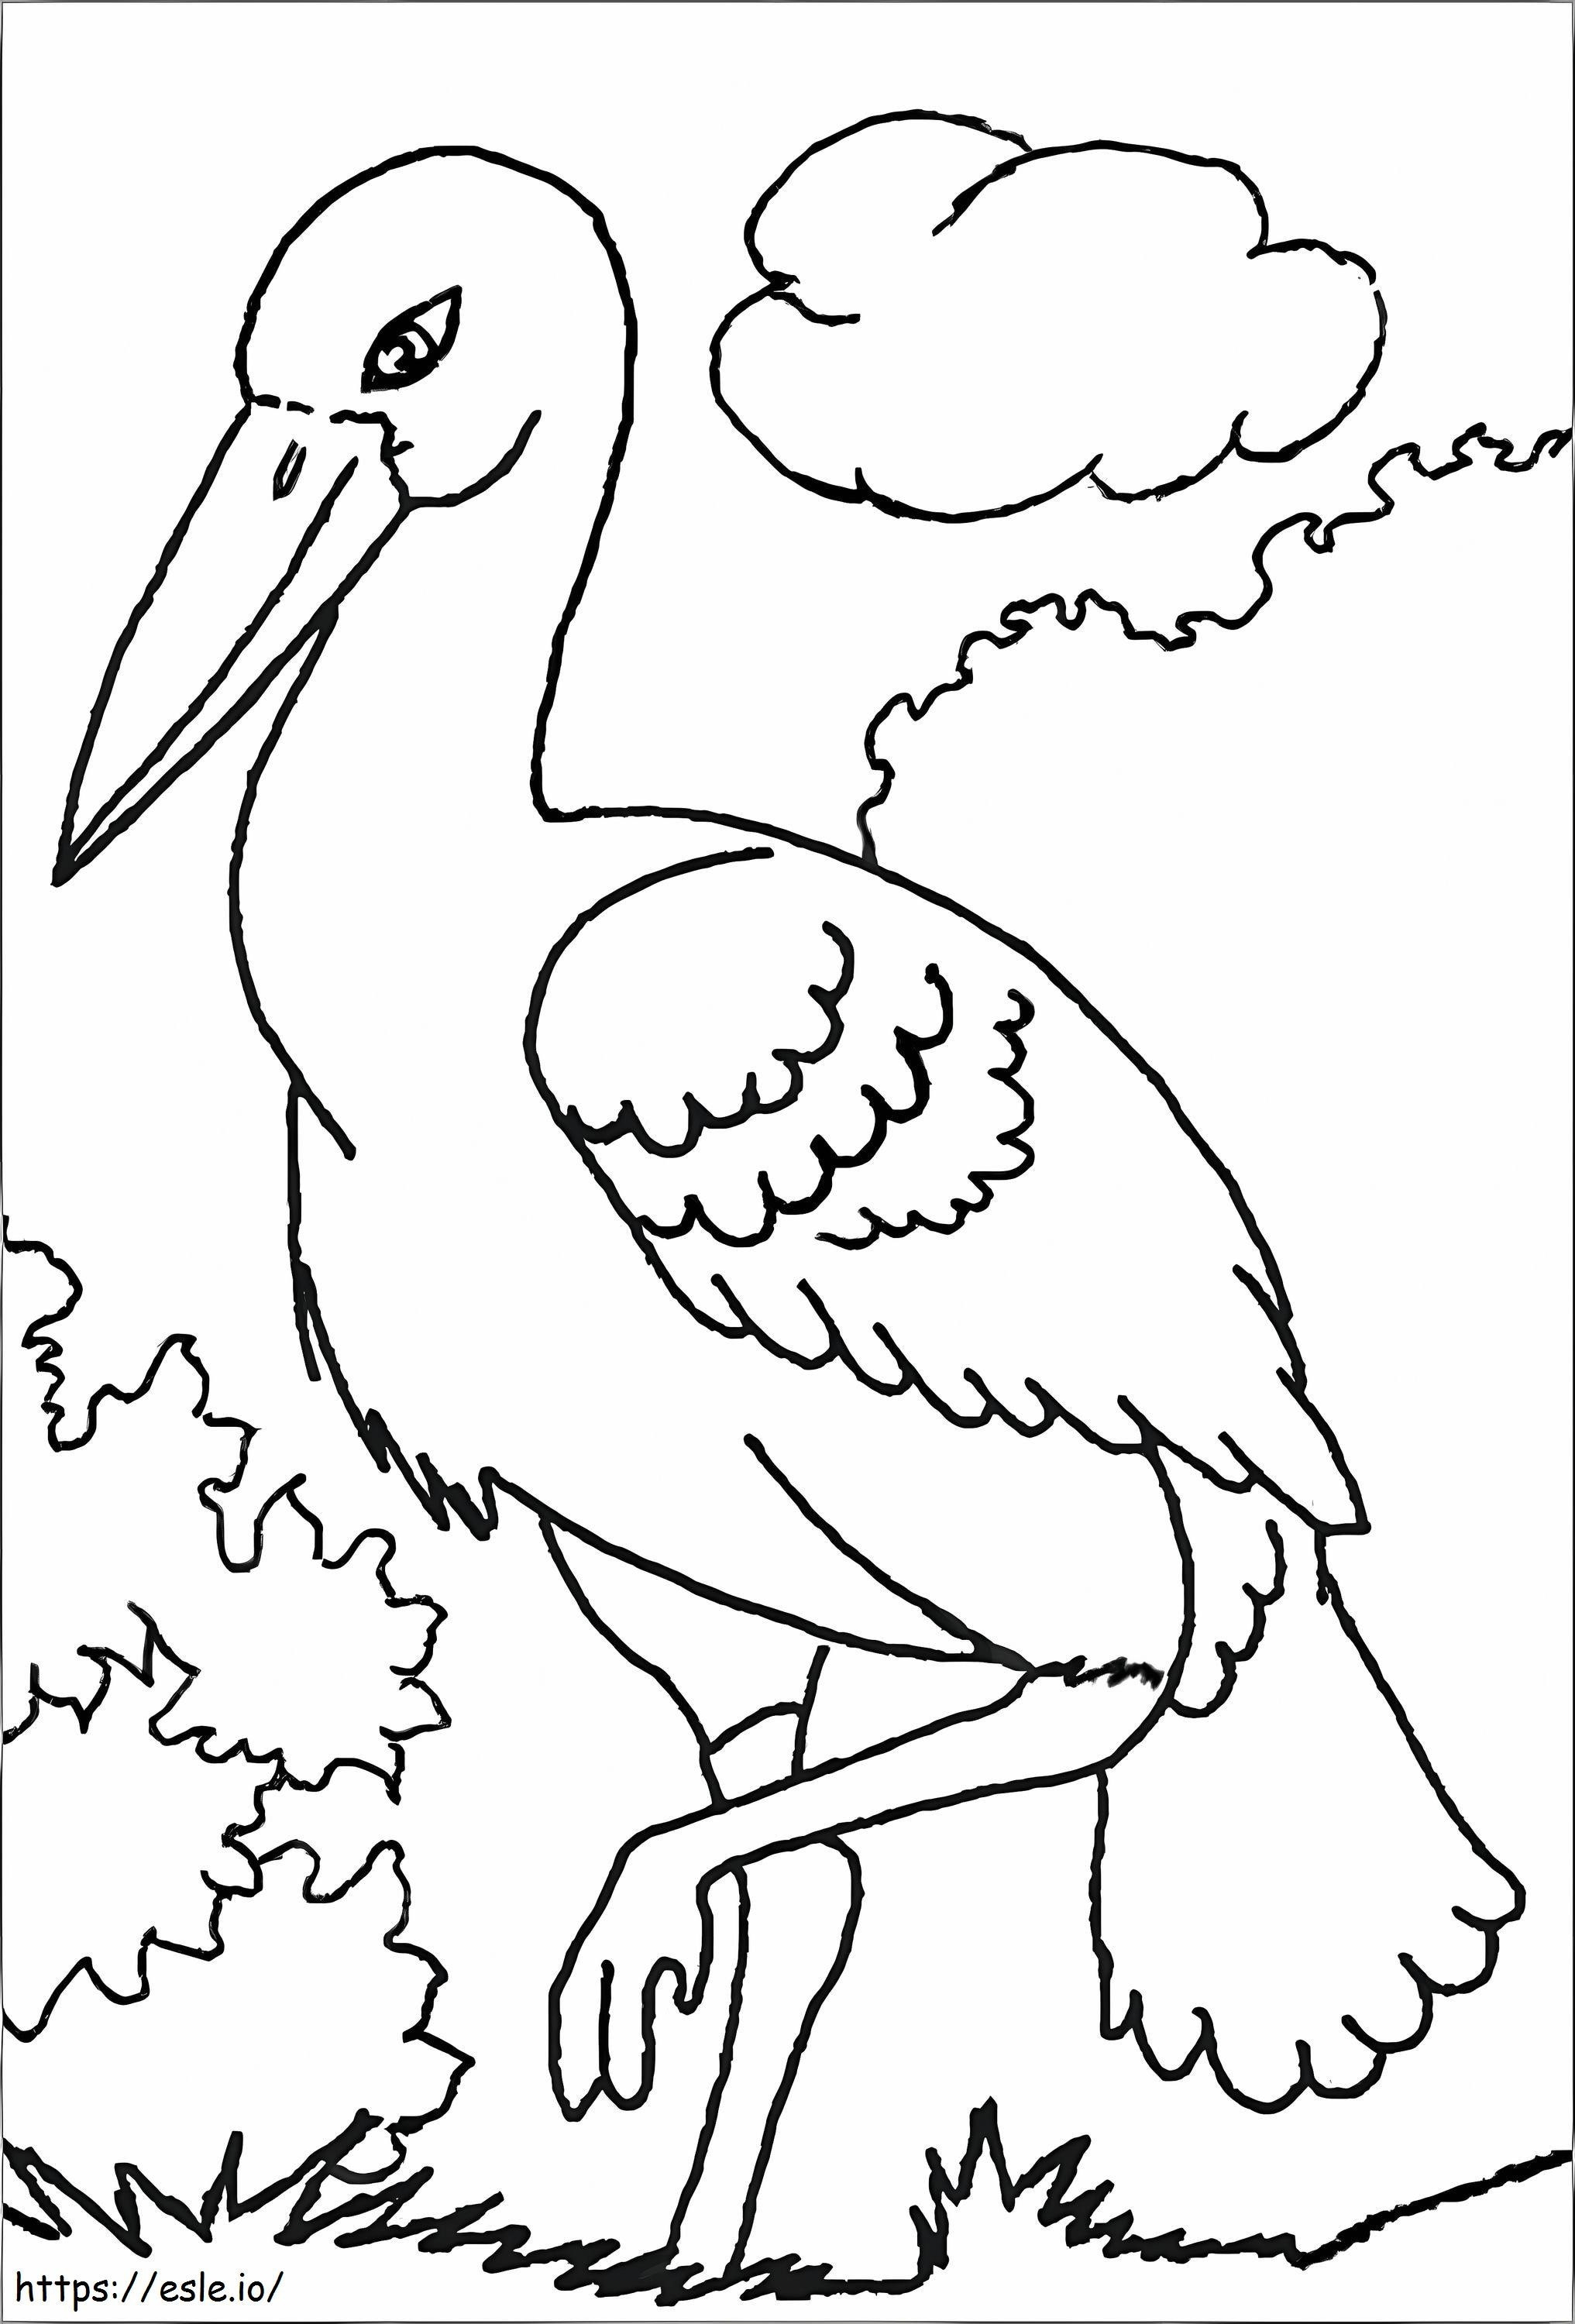 Fresh Stork coloring page